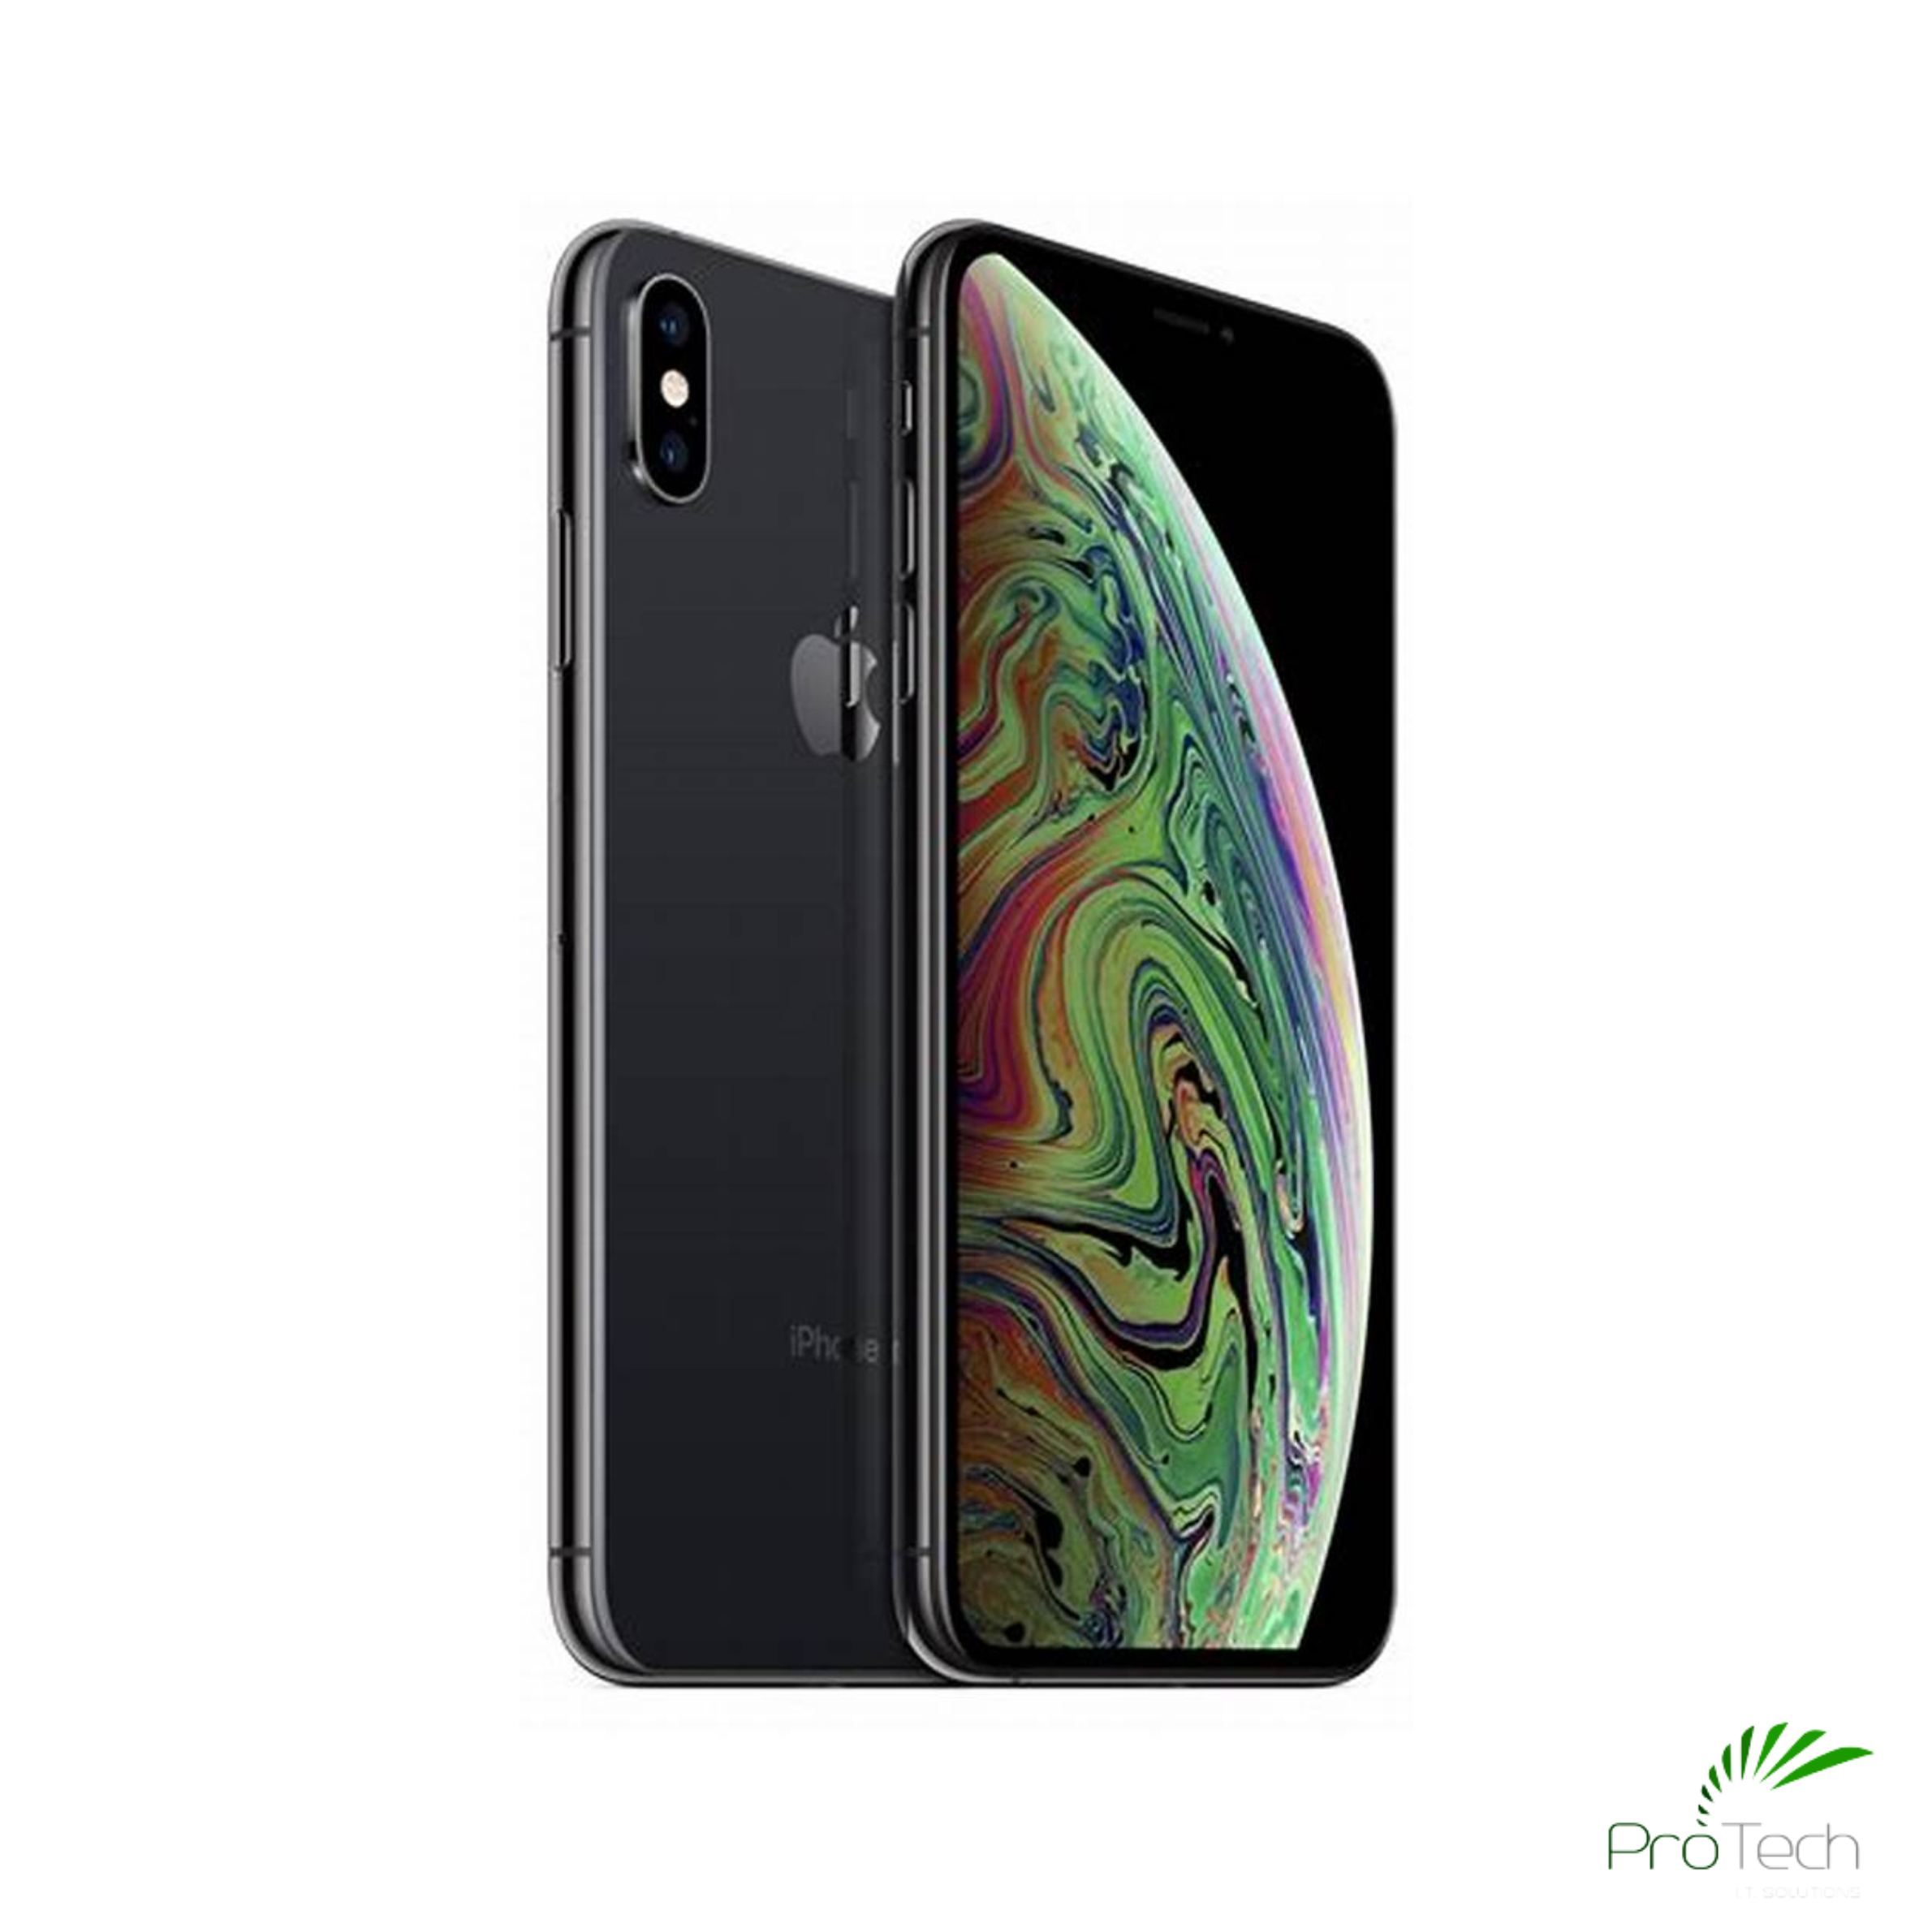 Apple iPhone XS (Space Grey) 256GB – ProTech IT Solutions